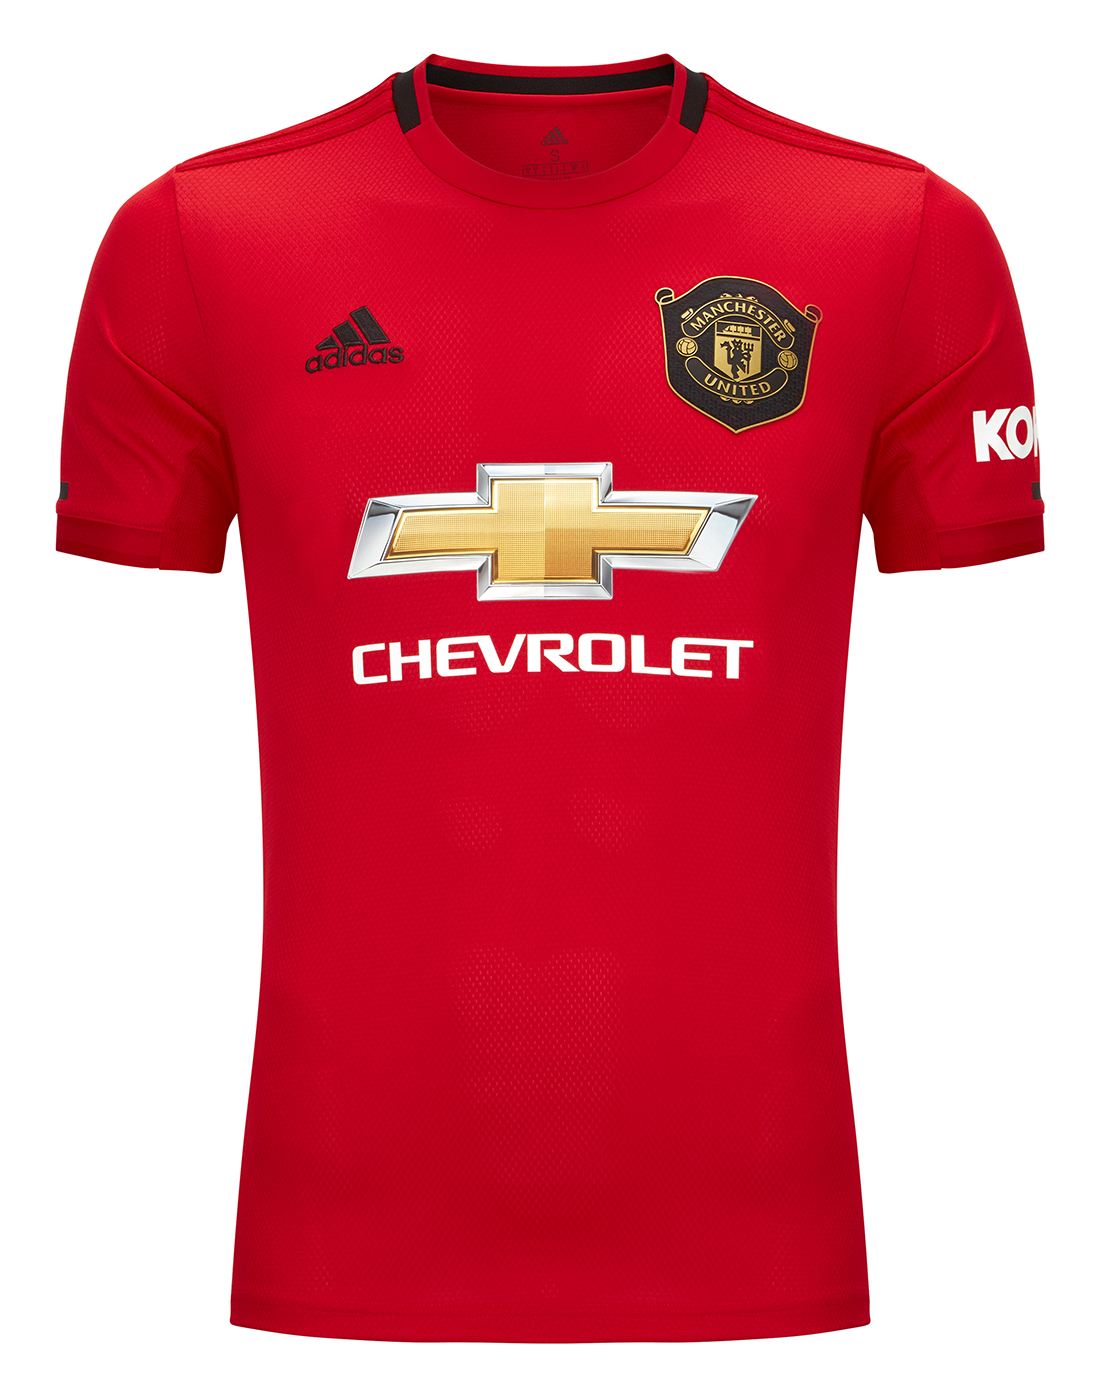 Manchester united home jersey information